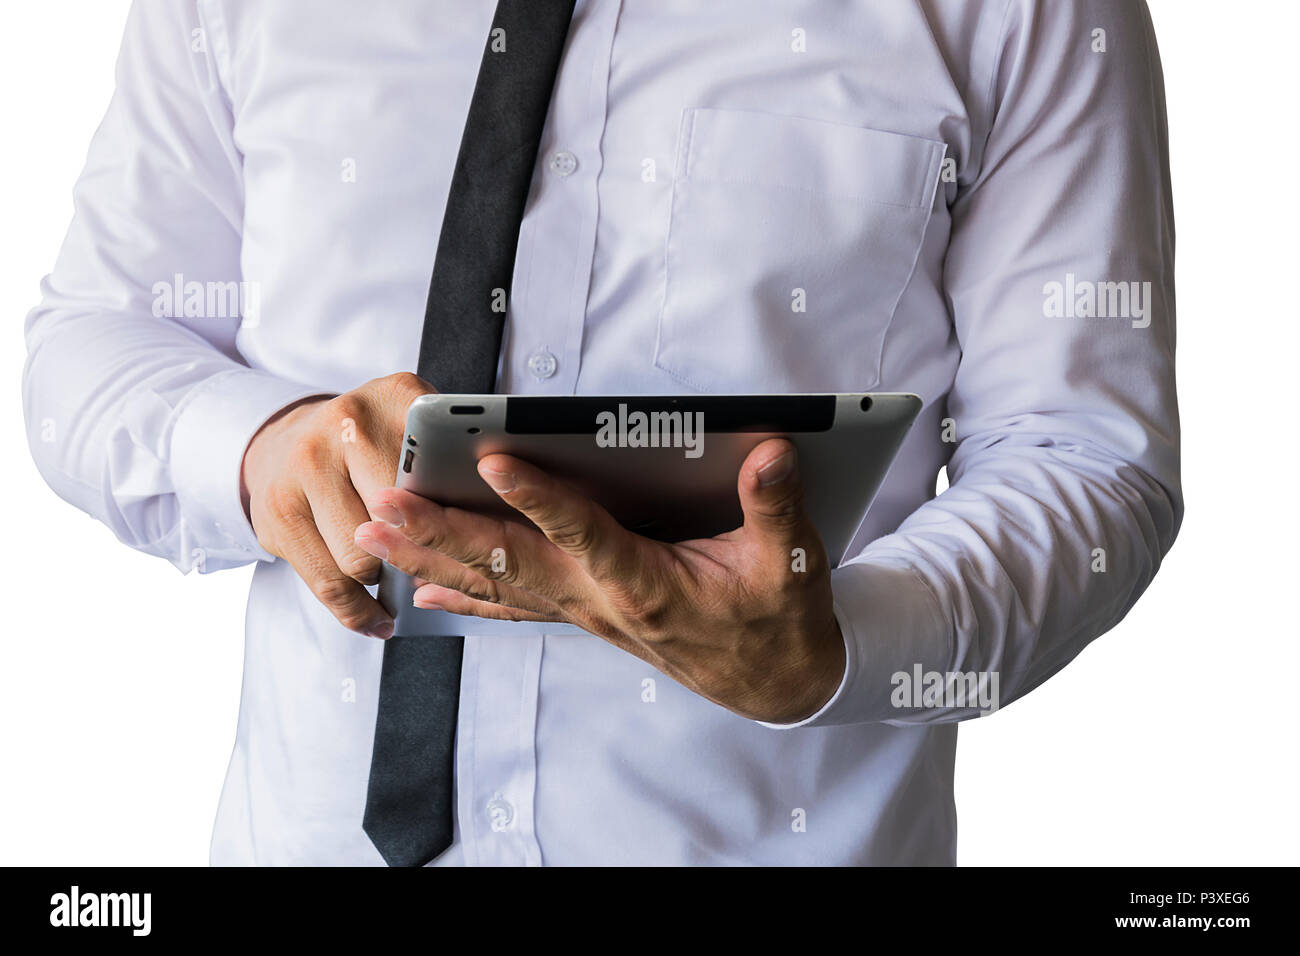 Men wear white shirt, black tie, trustworthy businessman, in handheld tablet running, with finger on the screen. Stock Photo